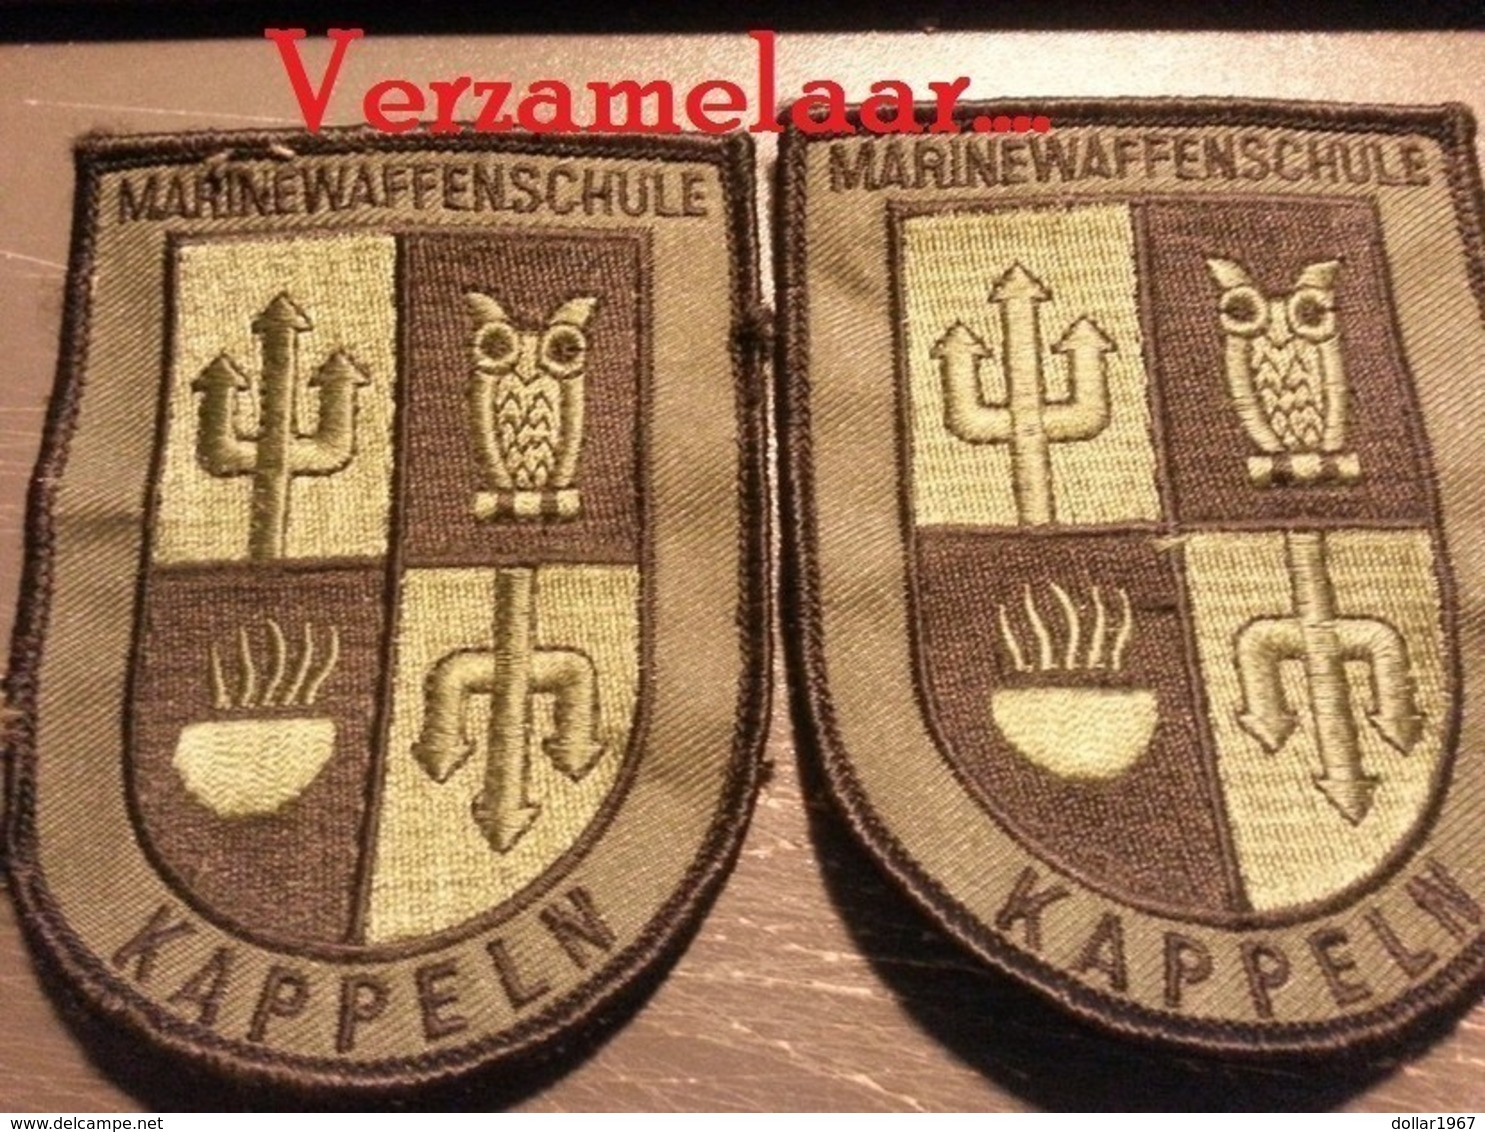 Duitsland - Marinewaffenschule Kappeln  - See The 2 Scans For Condition. ( Originalscan !!! ) - Patches